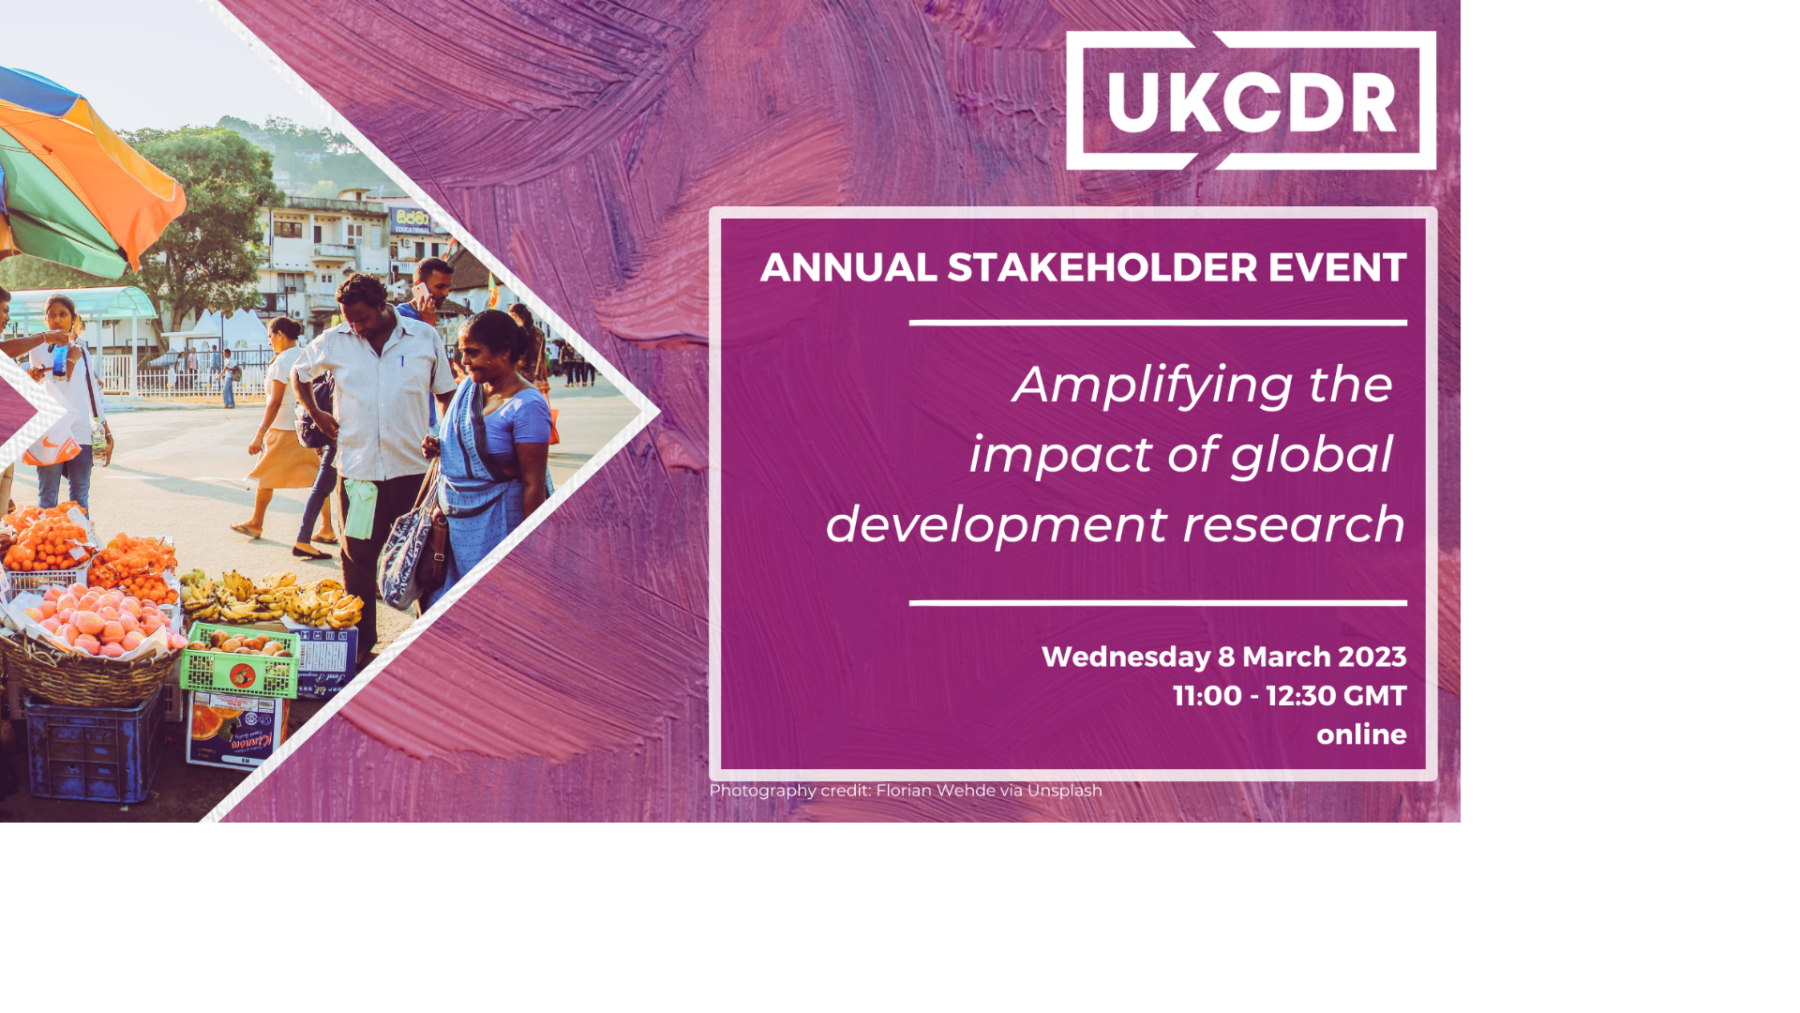 UKCDR Annual Stakeholder Event 2023